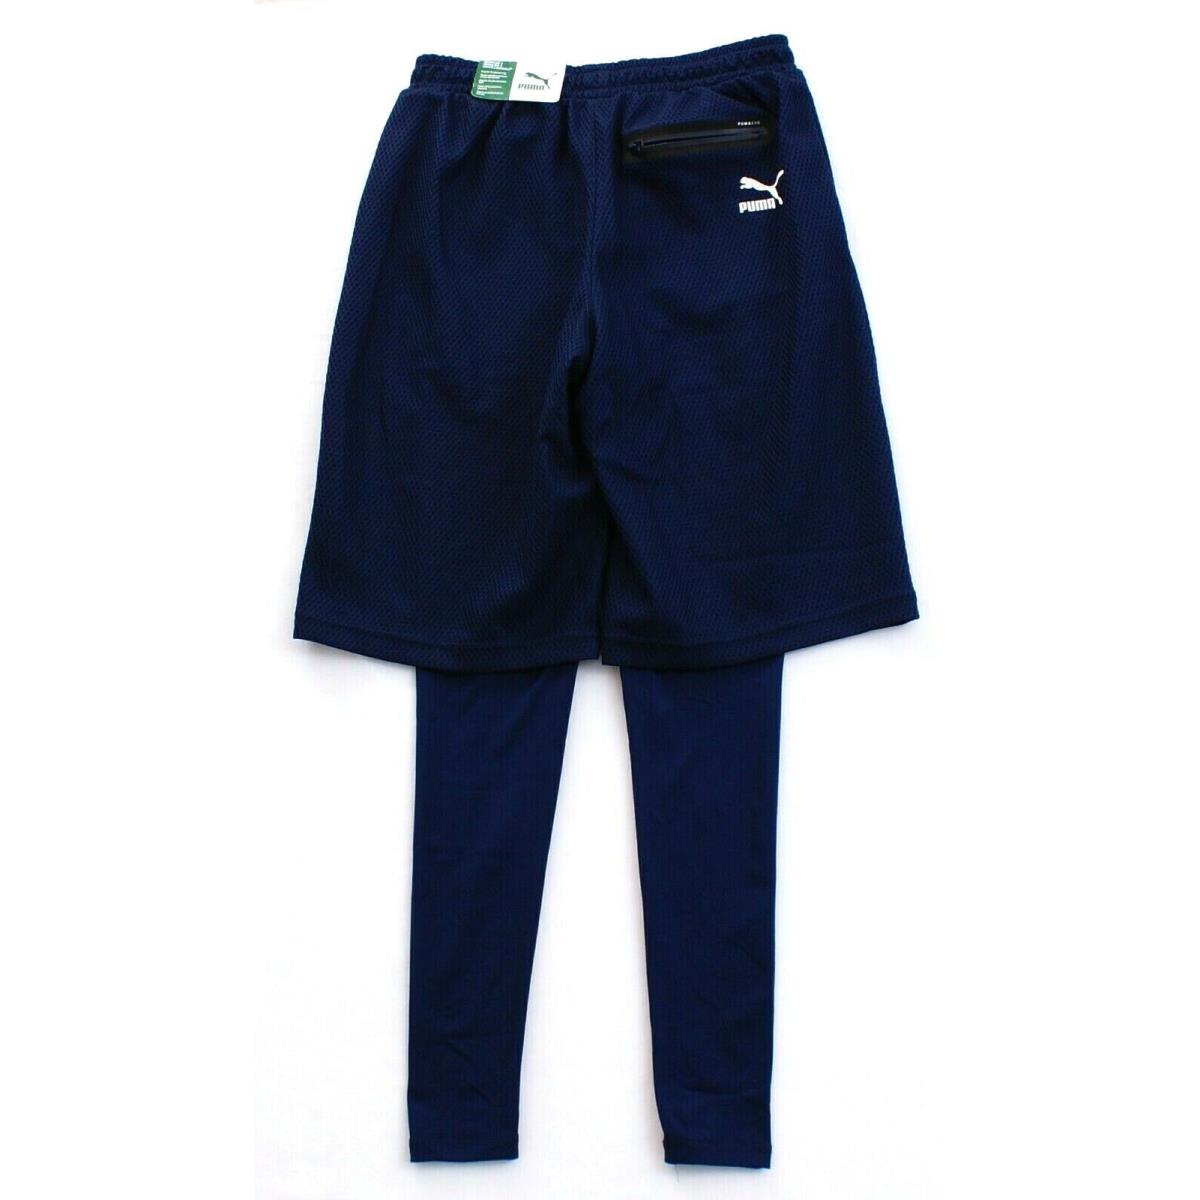 Puma Peacoat Blue Evo Layered Tights Shorts with Attached Tights Men`s